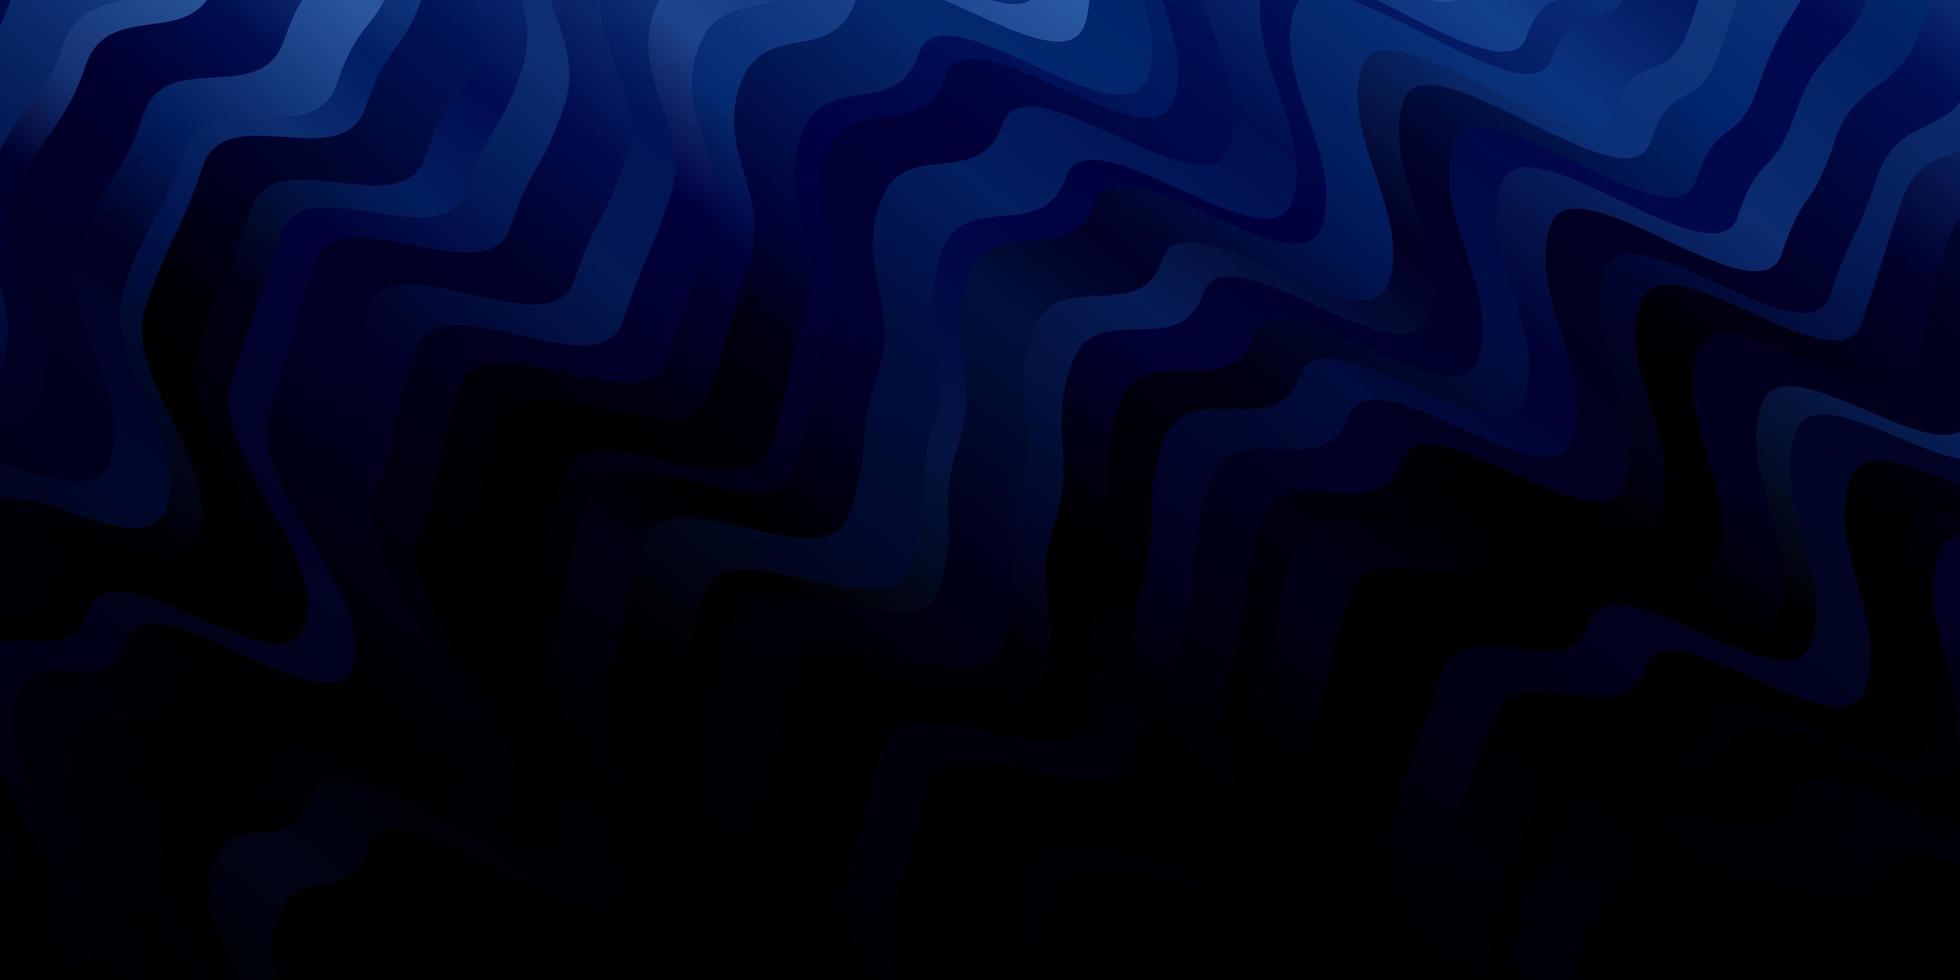 Dark BLUE vector background with curved lines. Abstract gradient illustration with wry lines. Pattern for websites, landing pages.